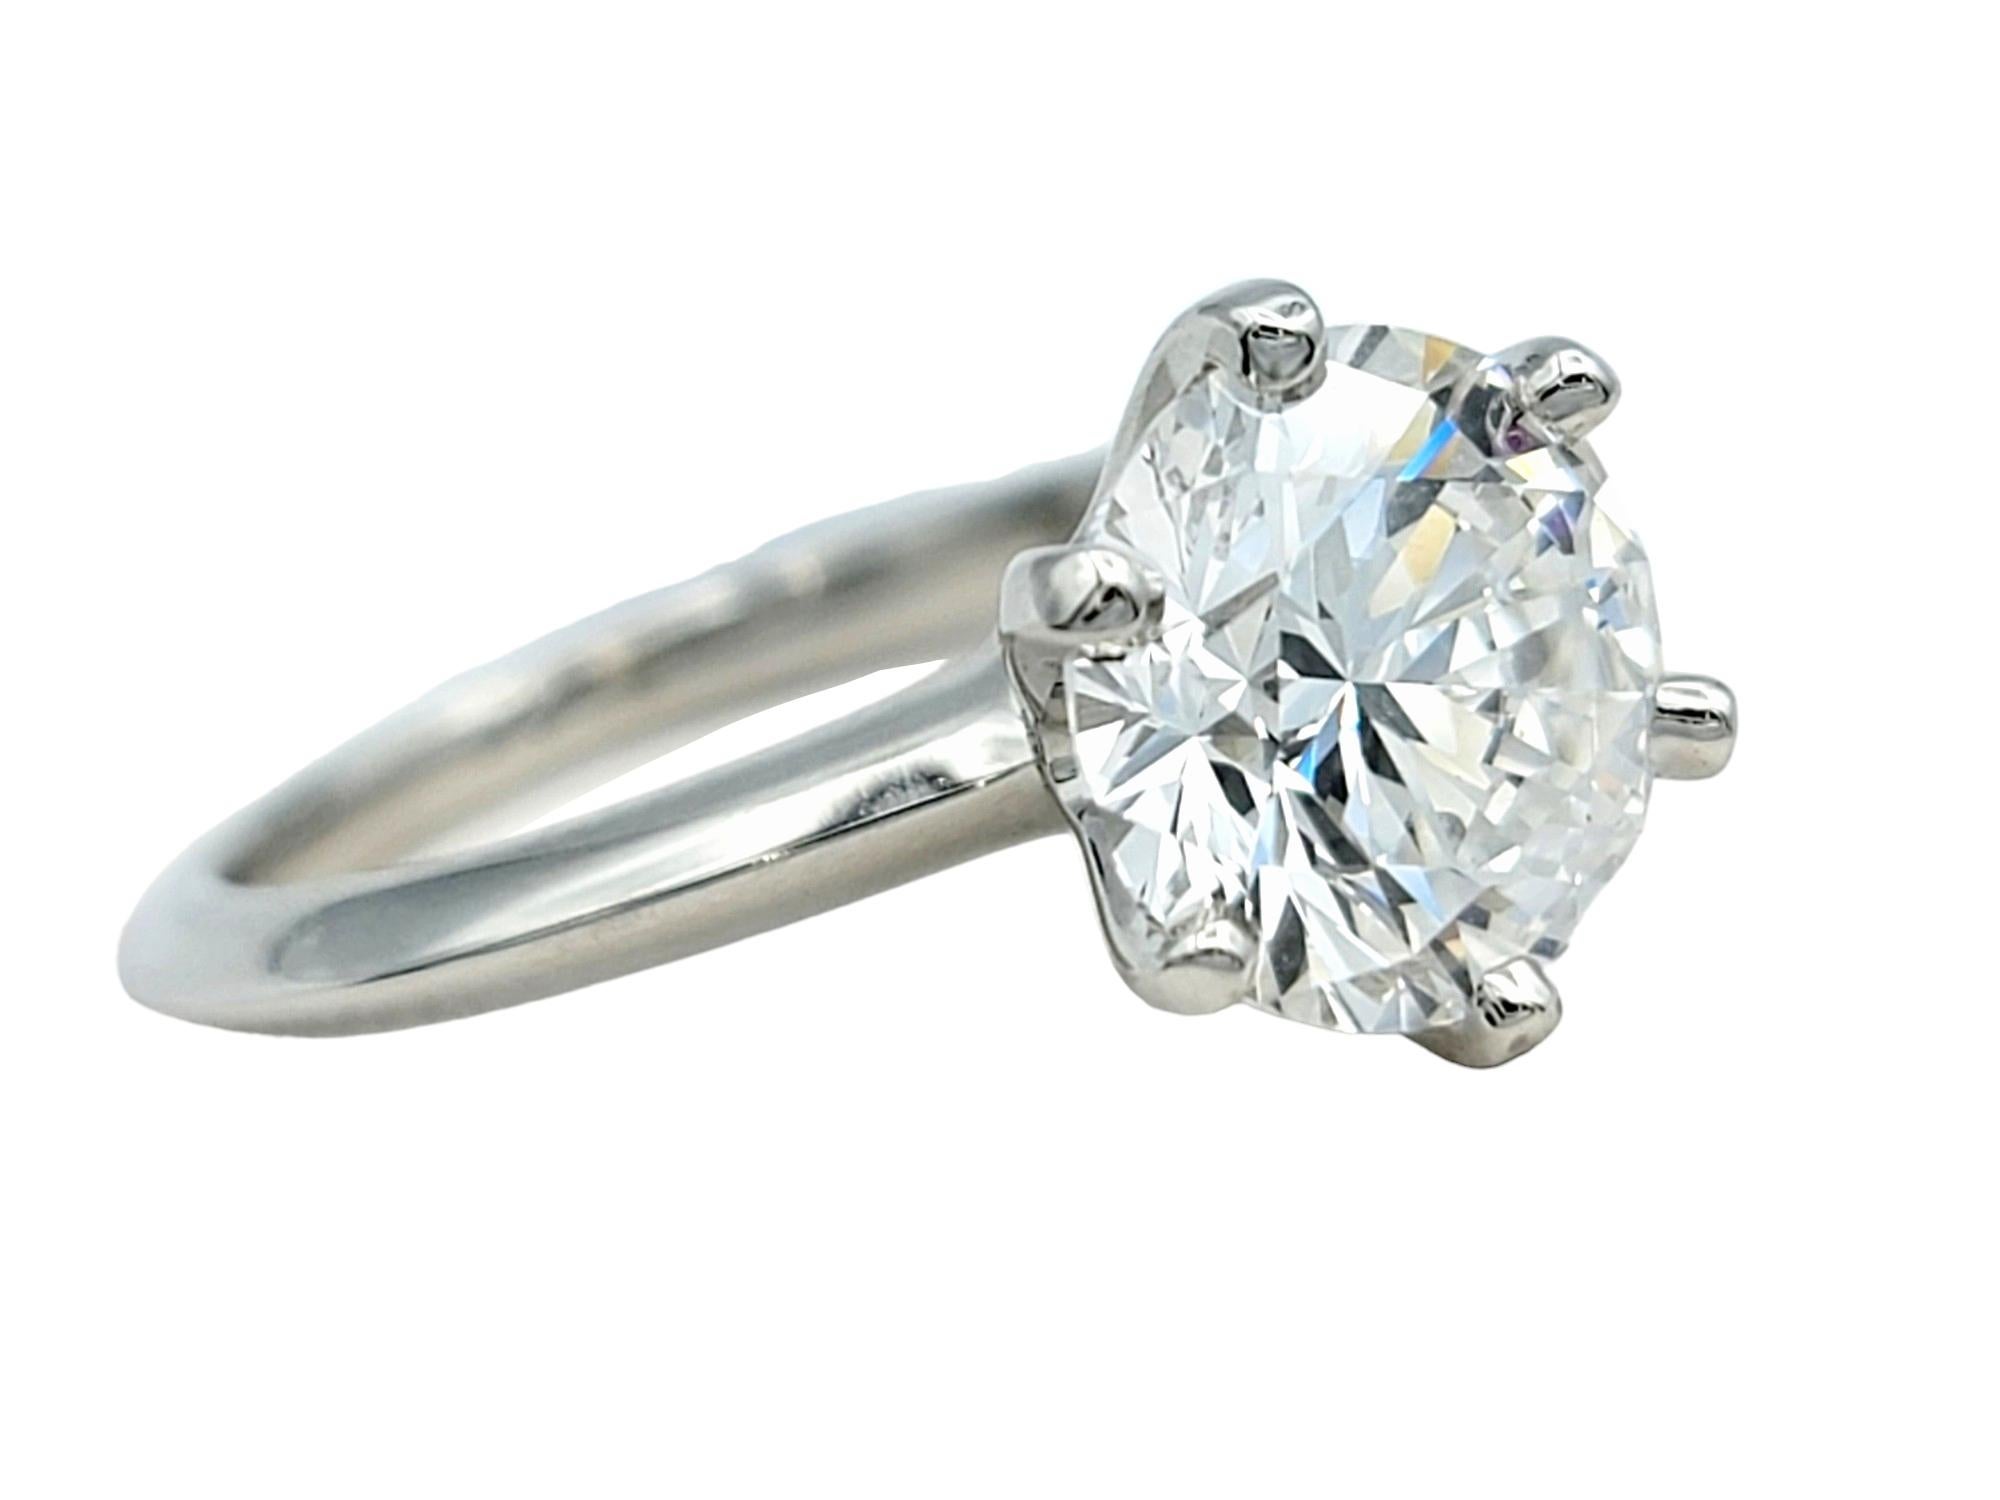 Ring size: 5

Say YES to this incredible diamond solitaire engagement ring from Tiffany & Co.! This mesmerizing ring is the epitome of the classic Tiffany engagement ring, with its sizeable round diamond and sleek, feminine band. Popping the